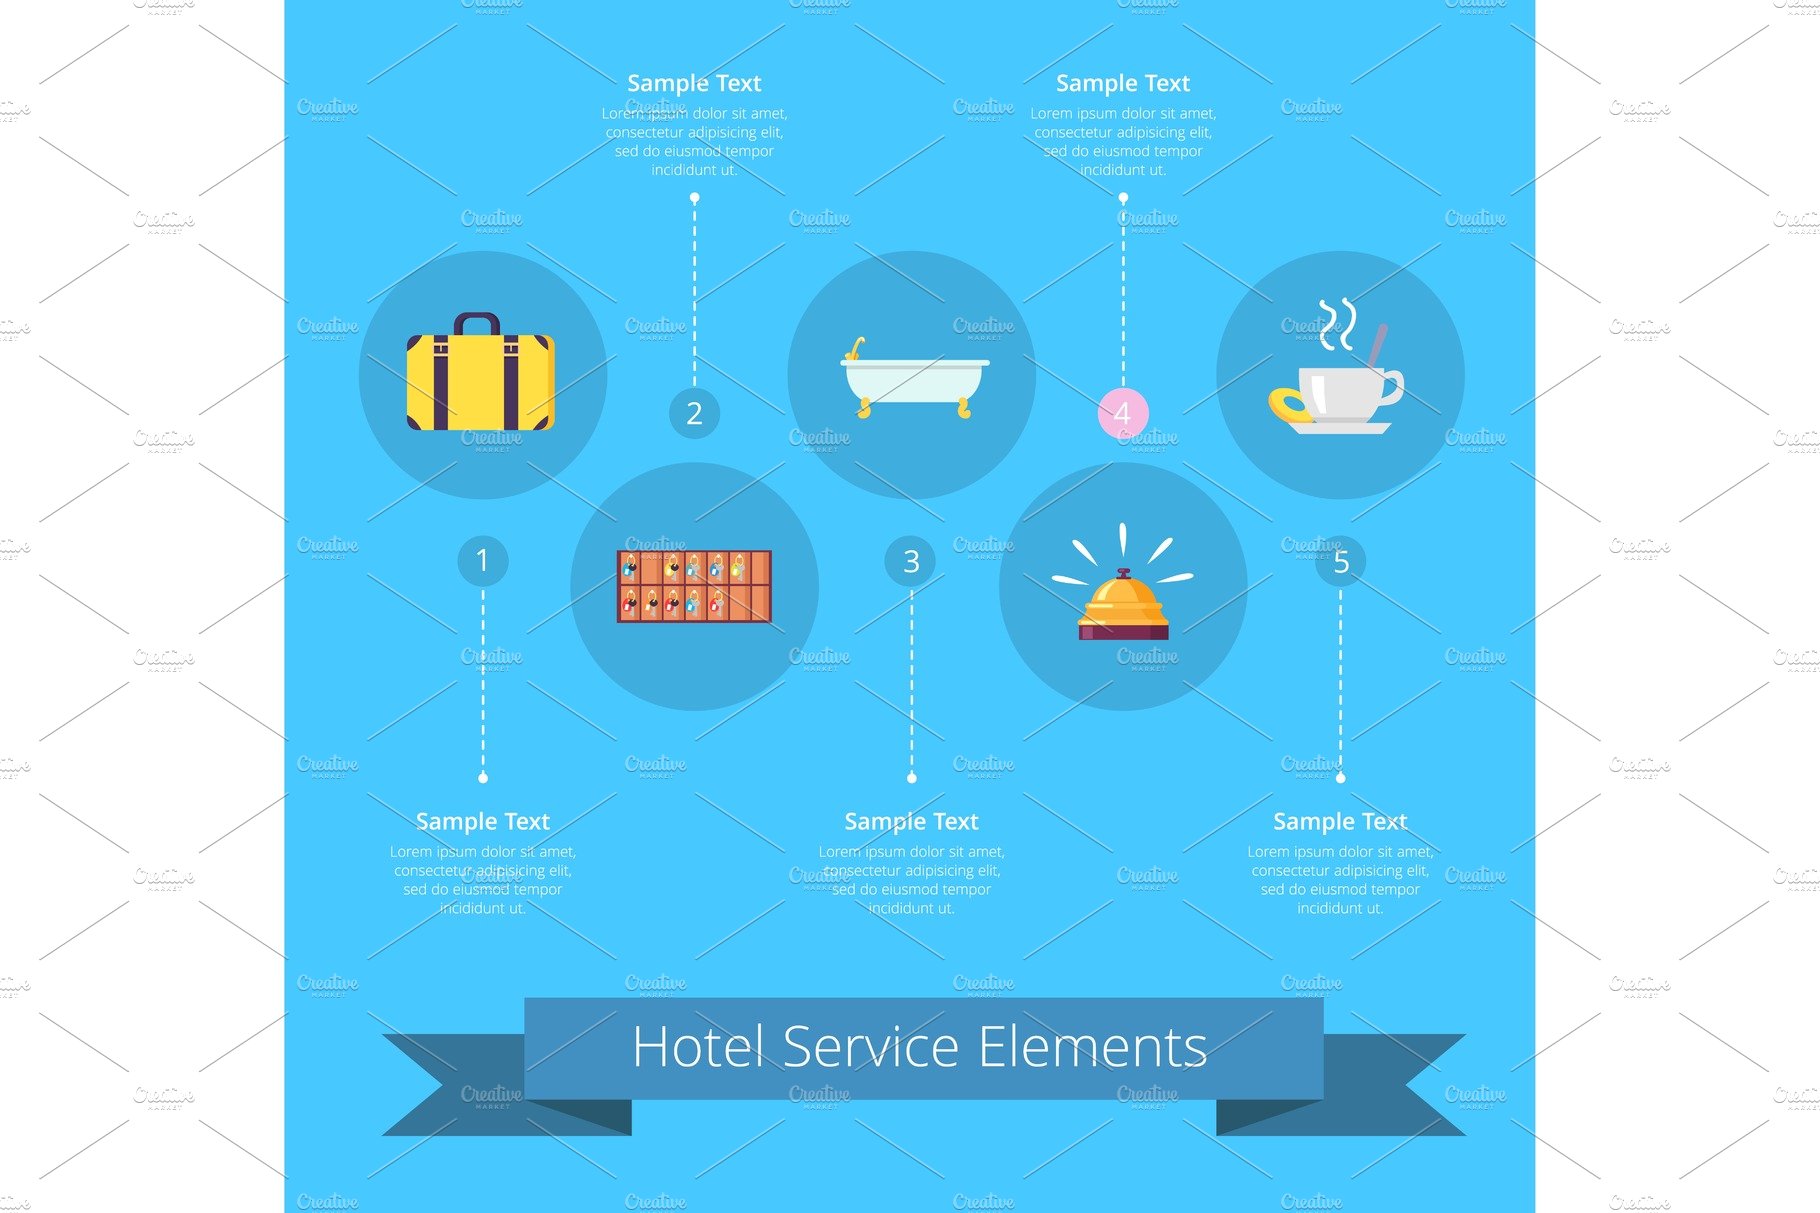 Hotel Service Elements Icons Vector cover image.